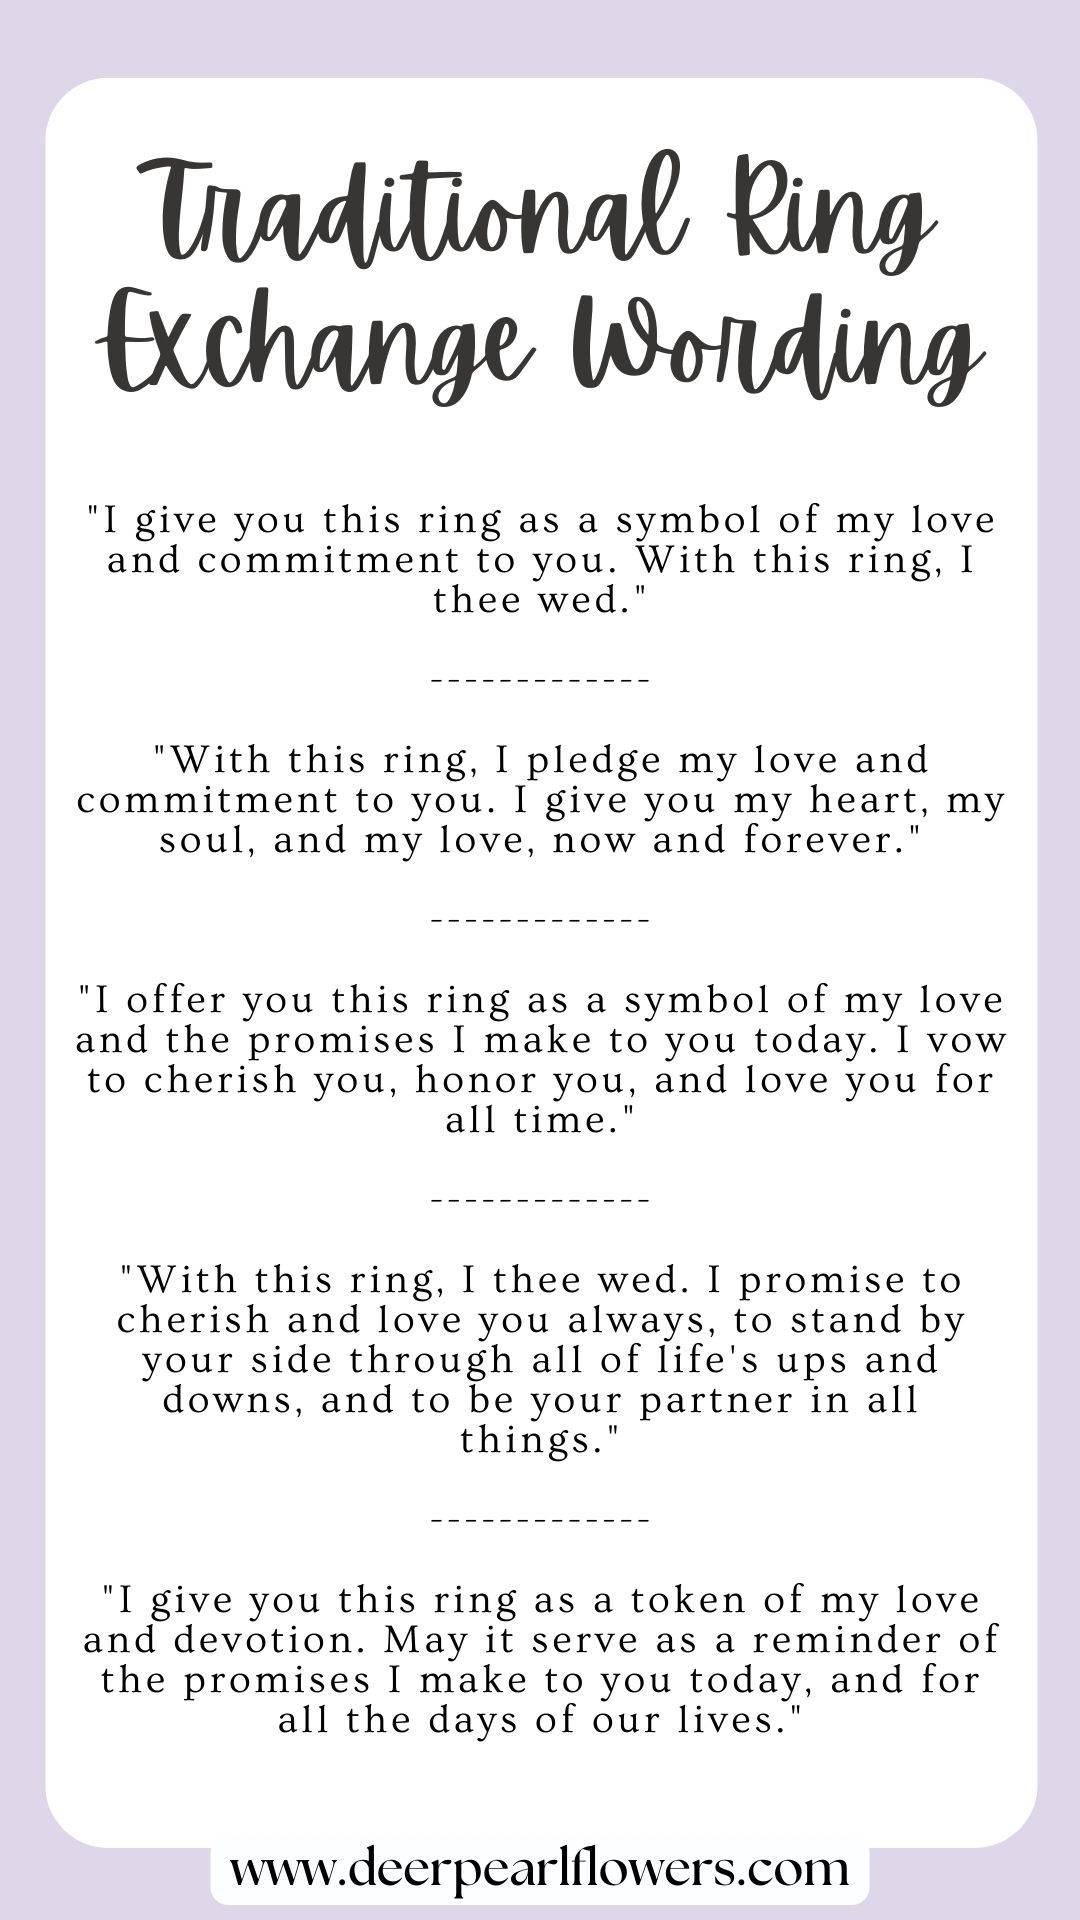 Traditional Ring Exchange Wording Examples